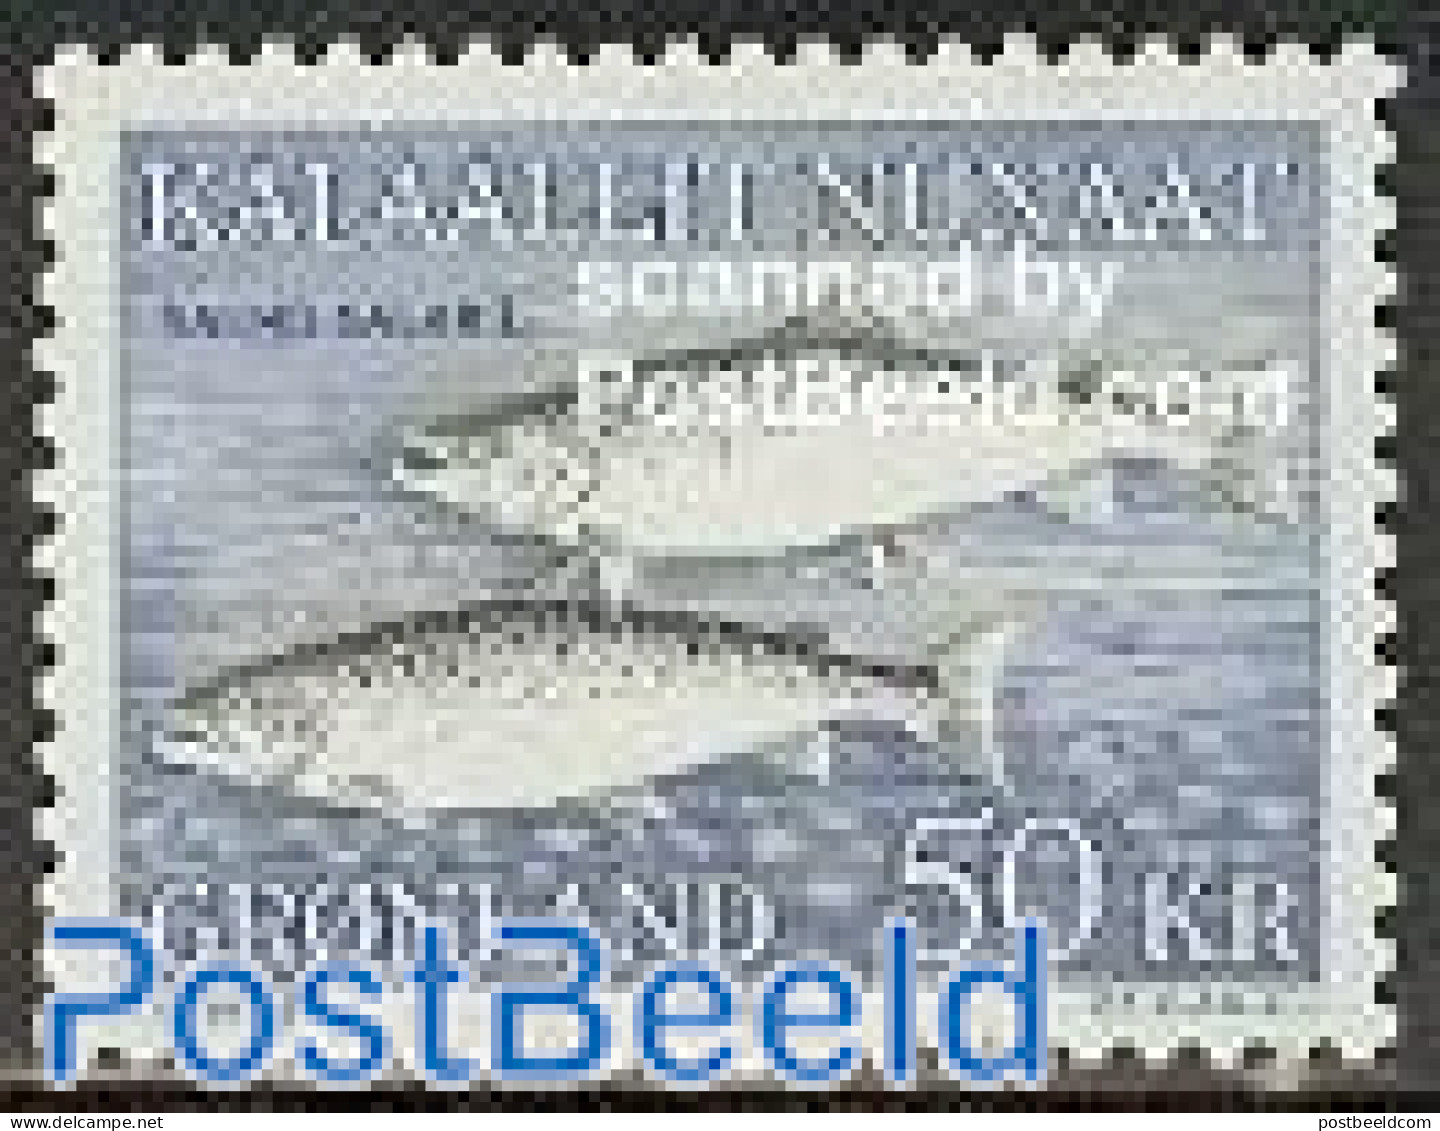 Greenland 1983 Fish 1v, Mint NH, Nature - Fish - Unused Stamps